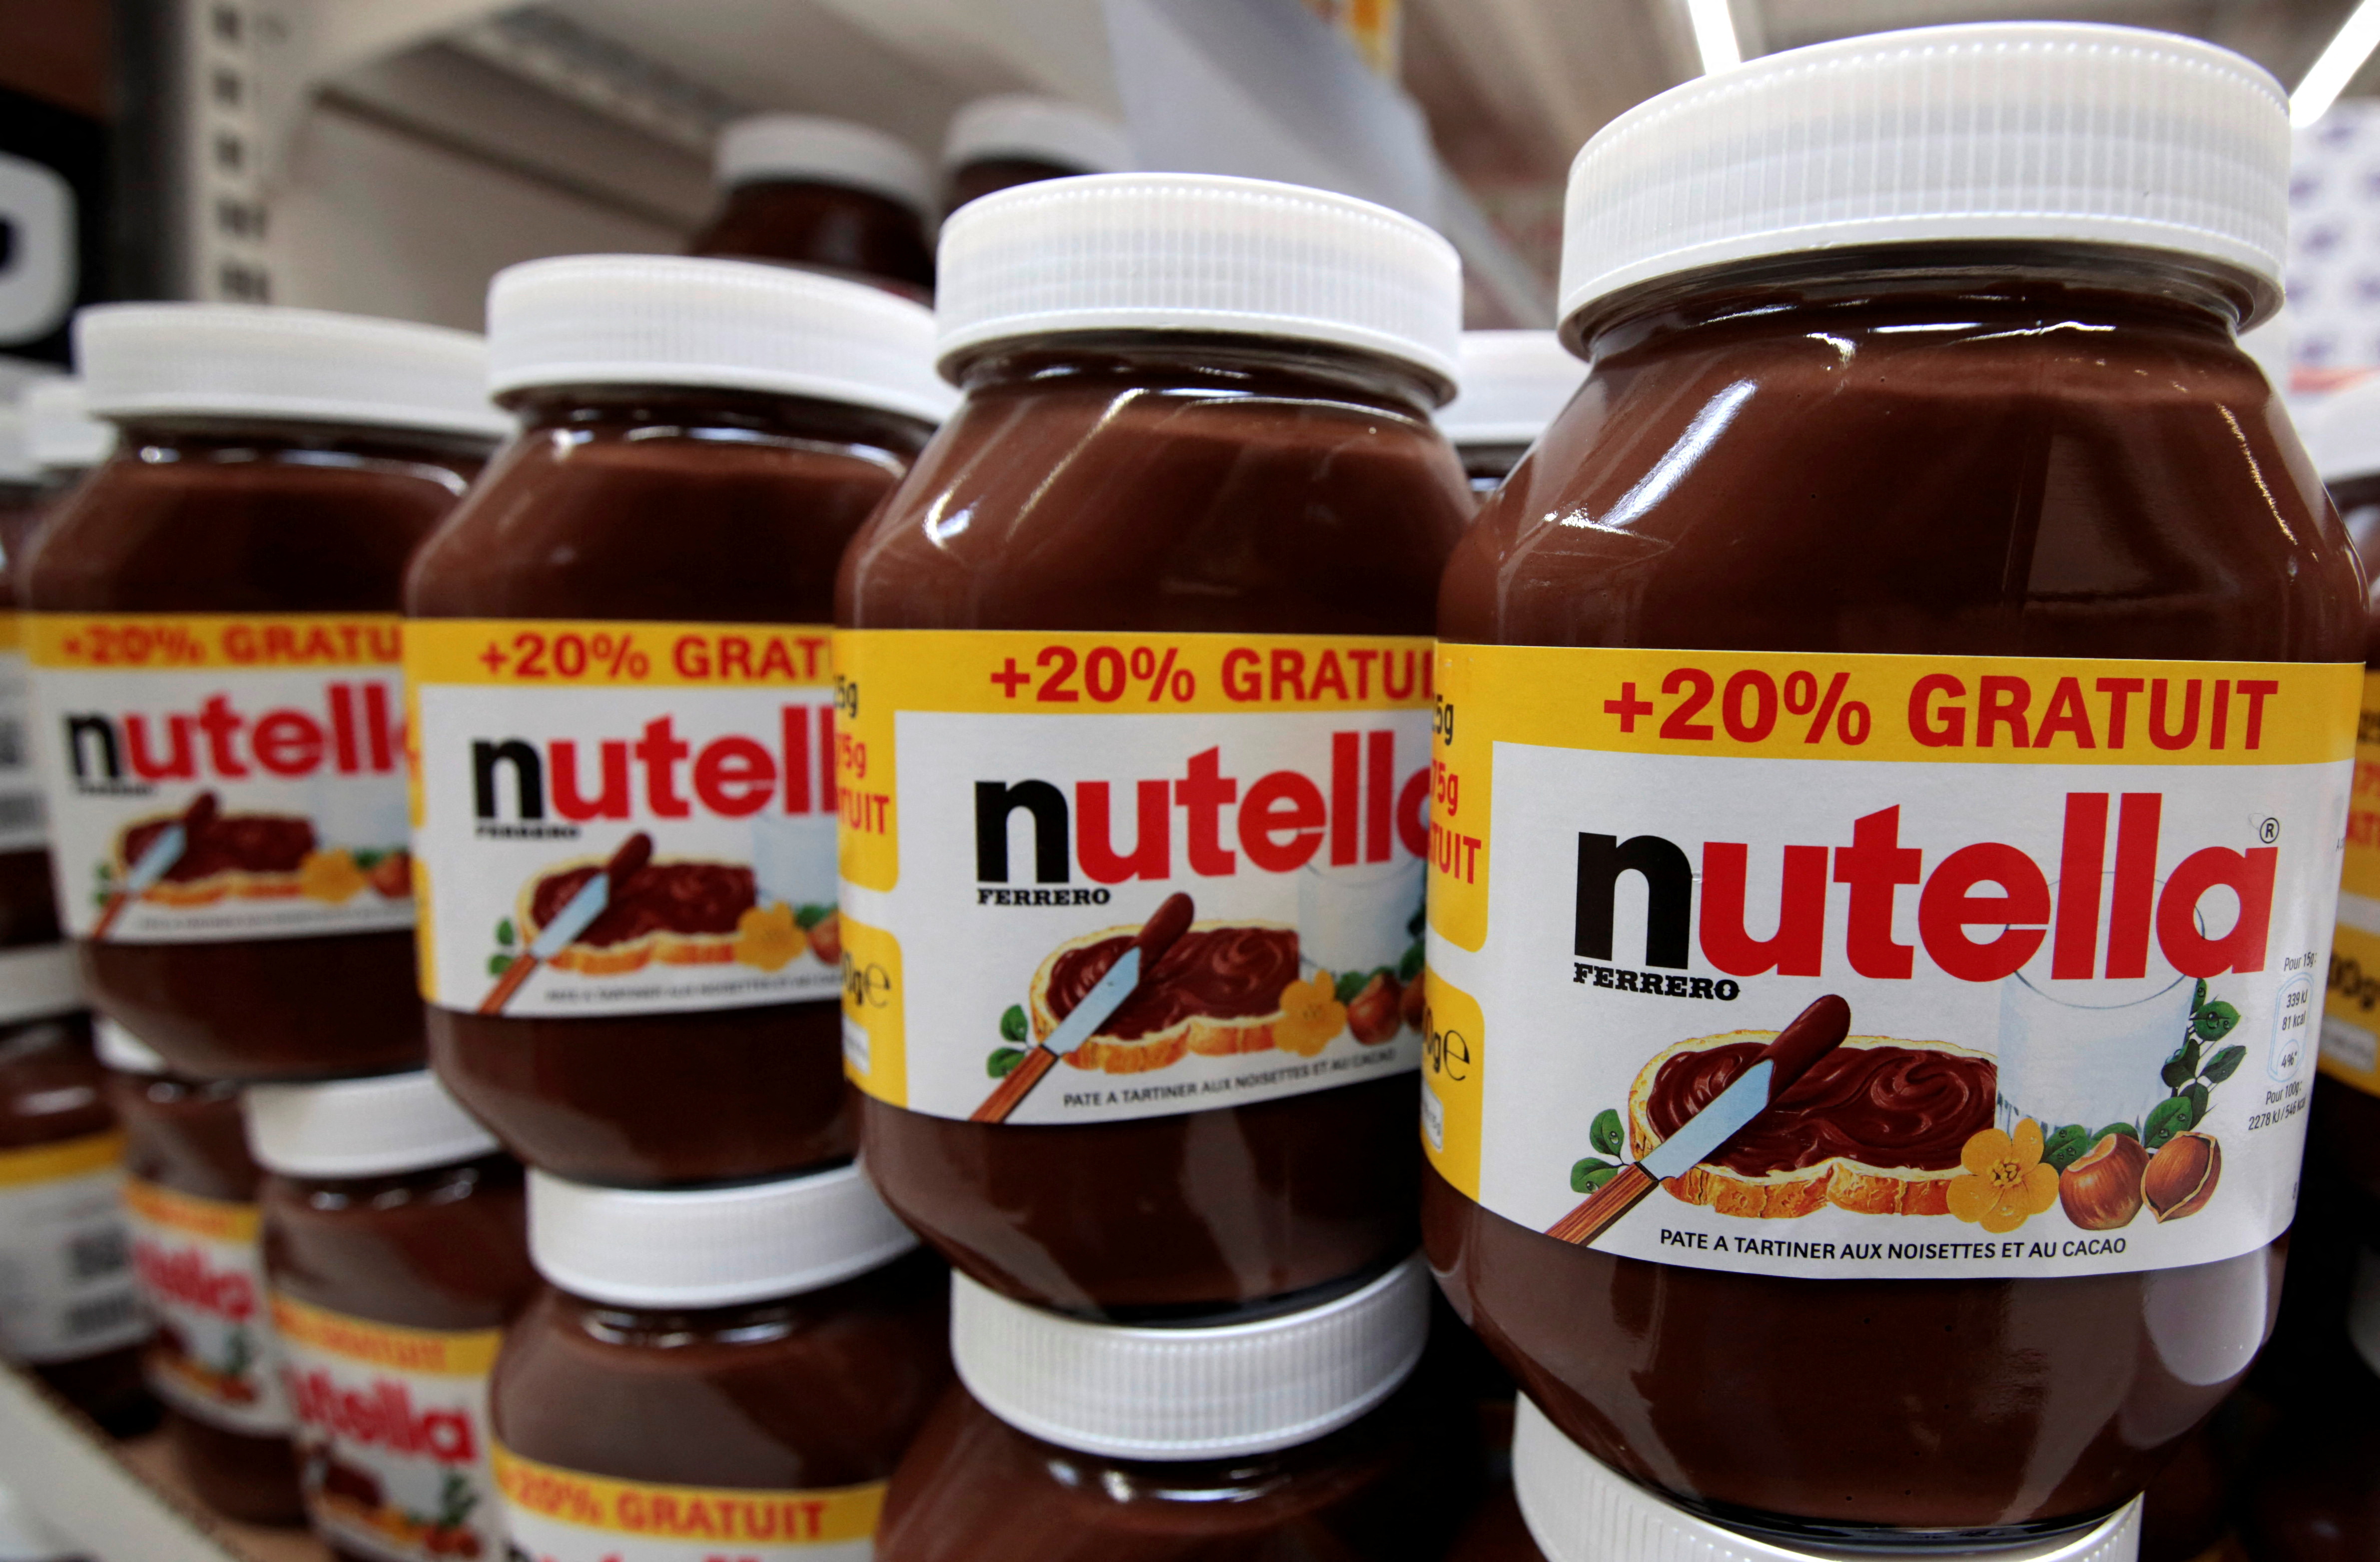 Jars of Nutella chocolate-hazelnut paste are displayed at a Carrefour hypermarket in Nice